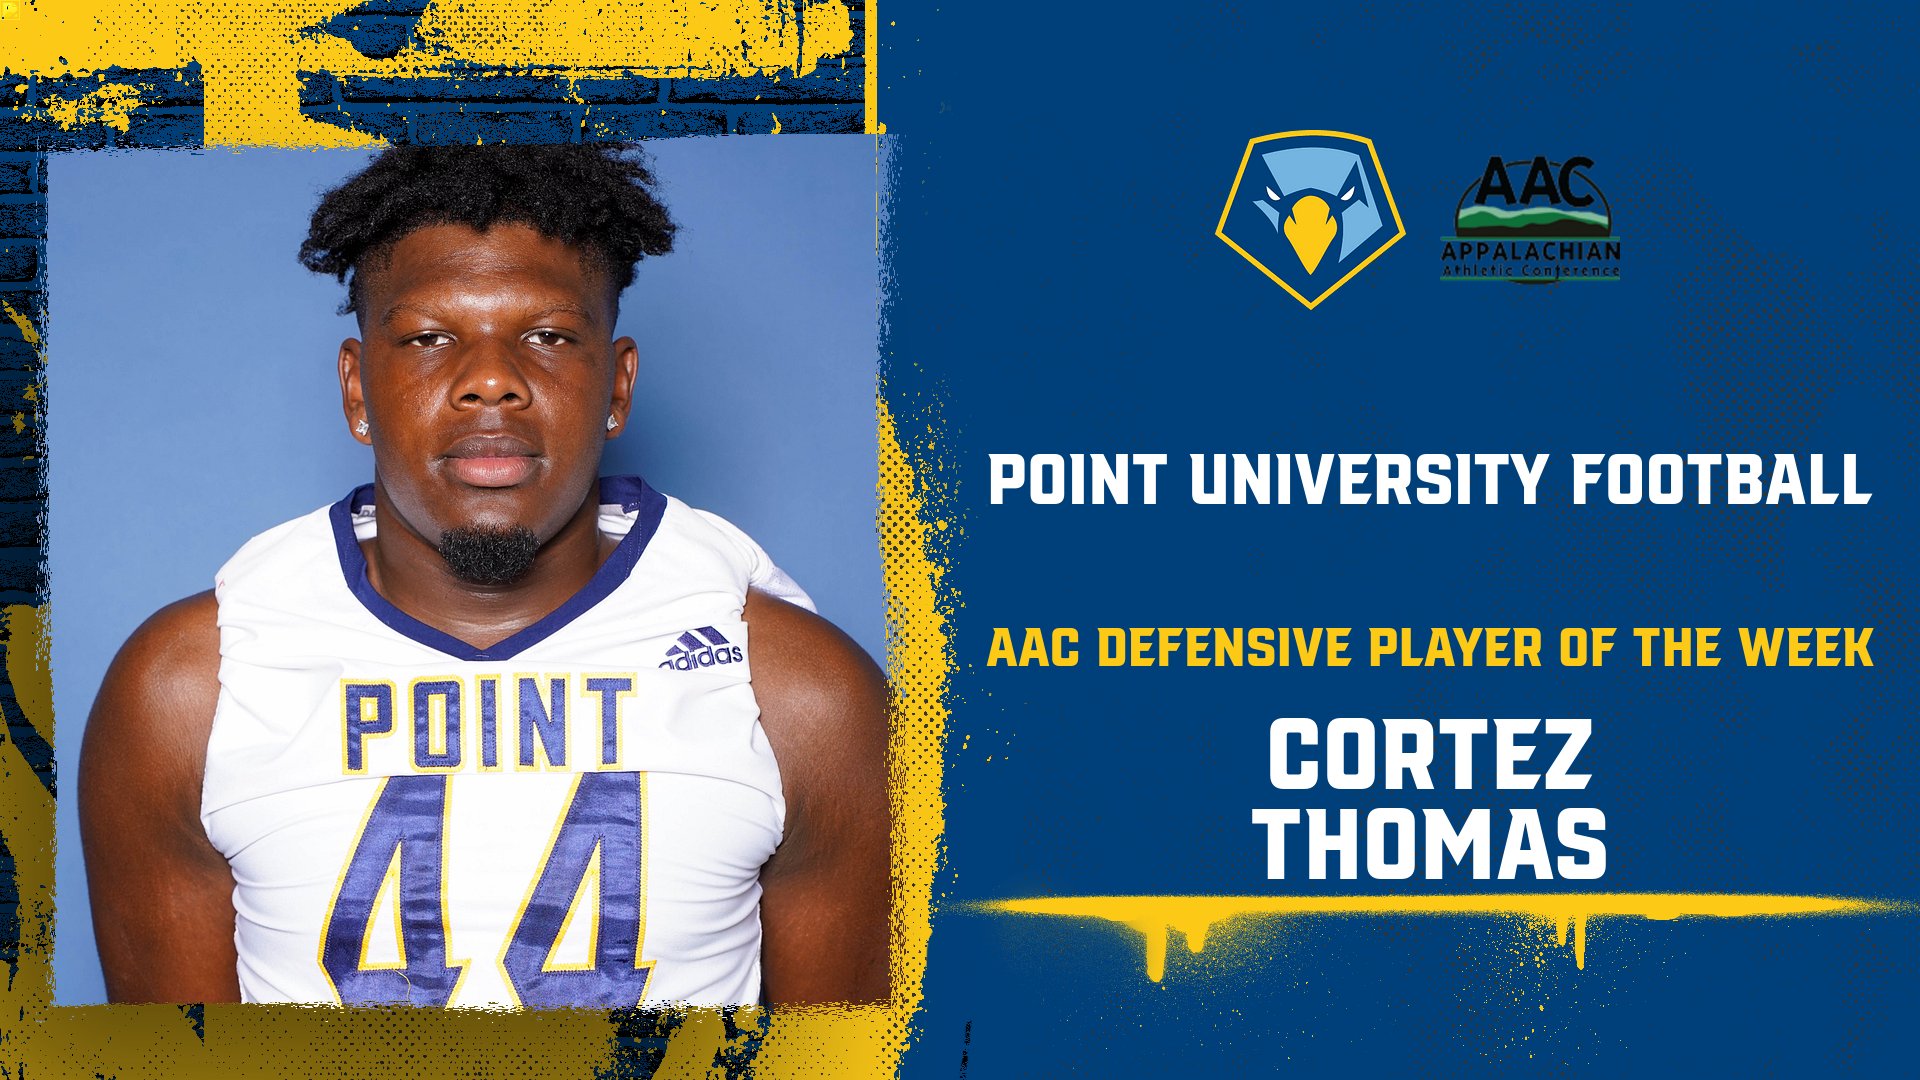 Cortez Thomas’ strong performance on Saturday earns him AAC Defensive Player of the Week